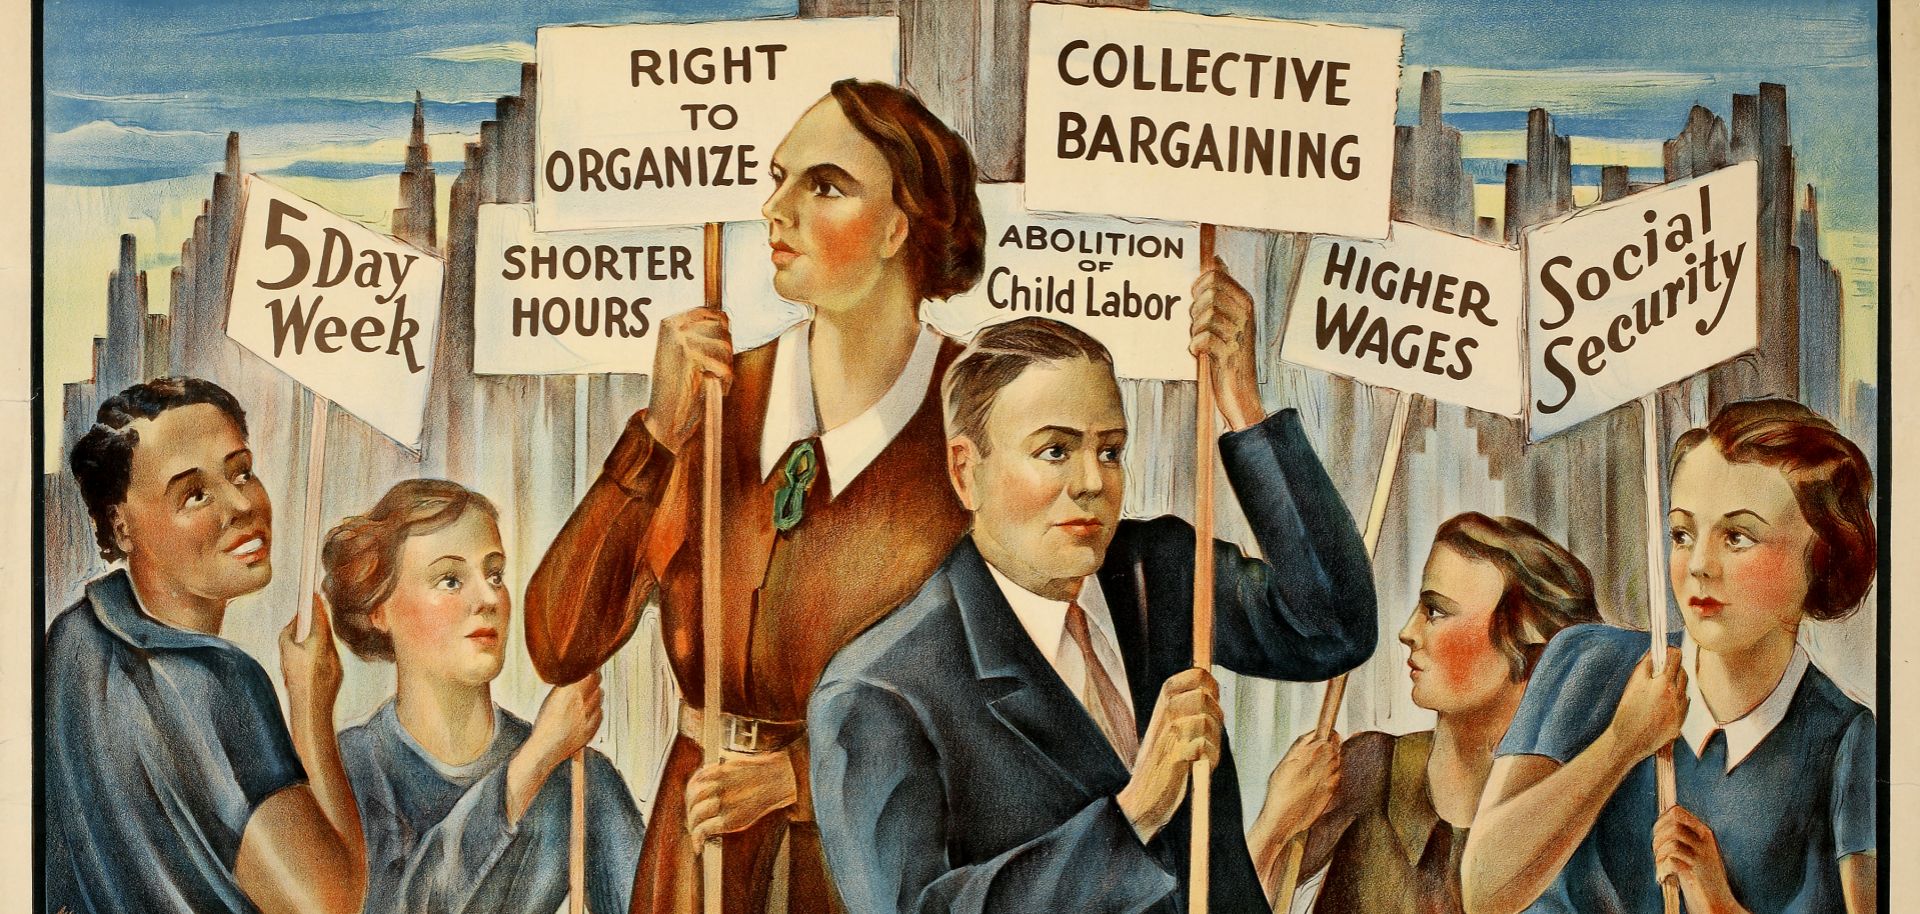 Signs in the labor poster call for a five-day week, shorter hours, the right to organize, abolition of child labor, collective bargaining, higher wages and social security.